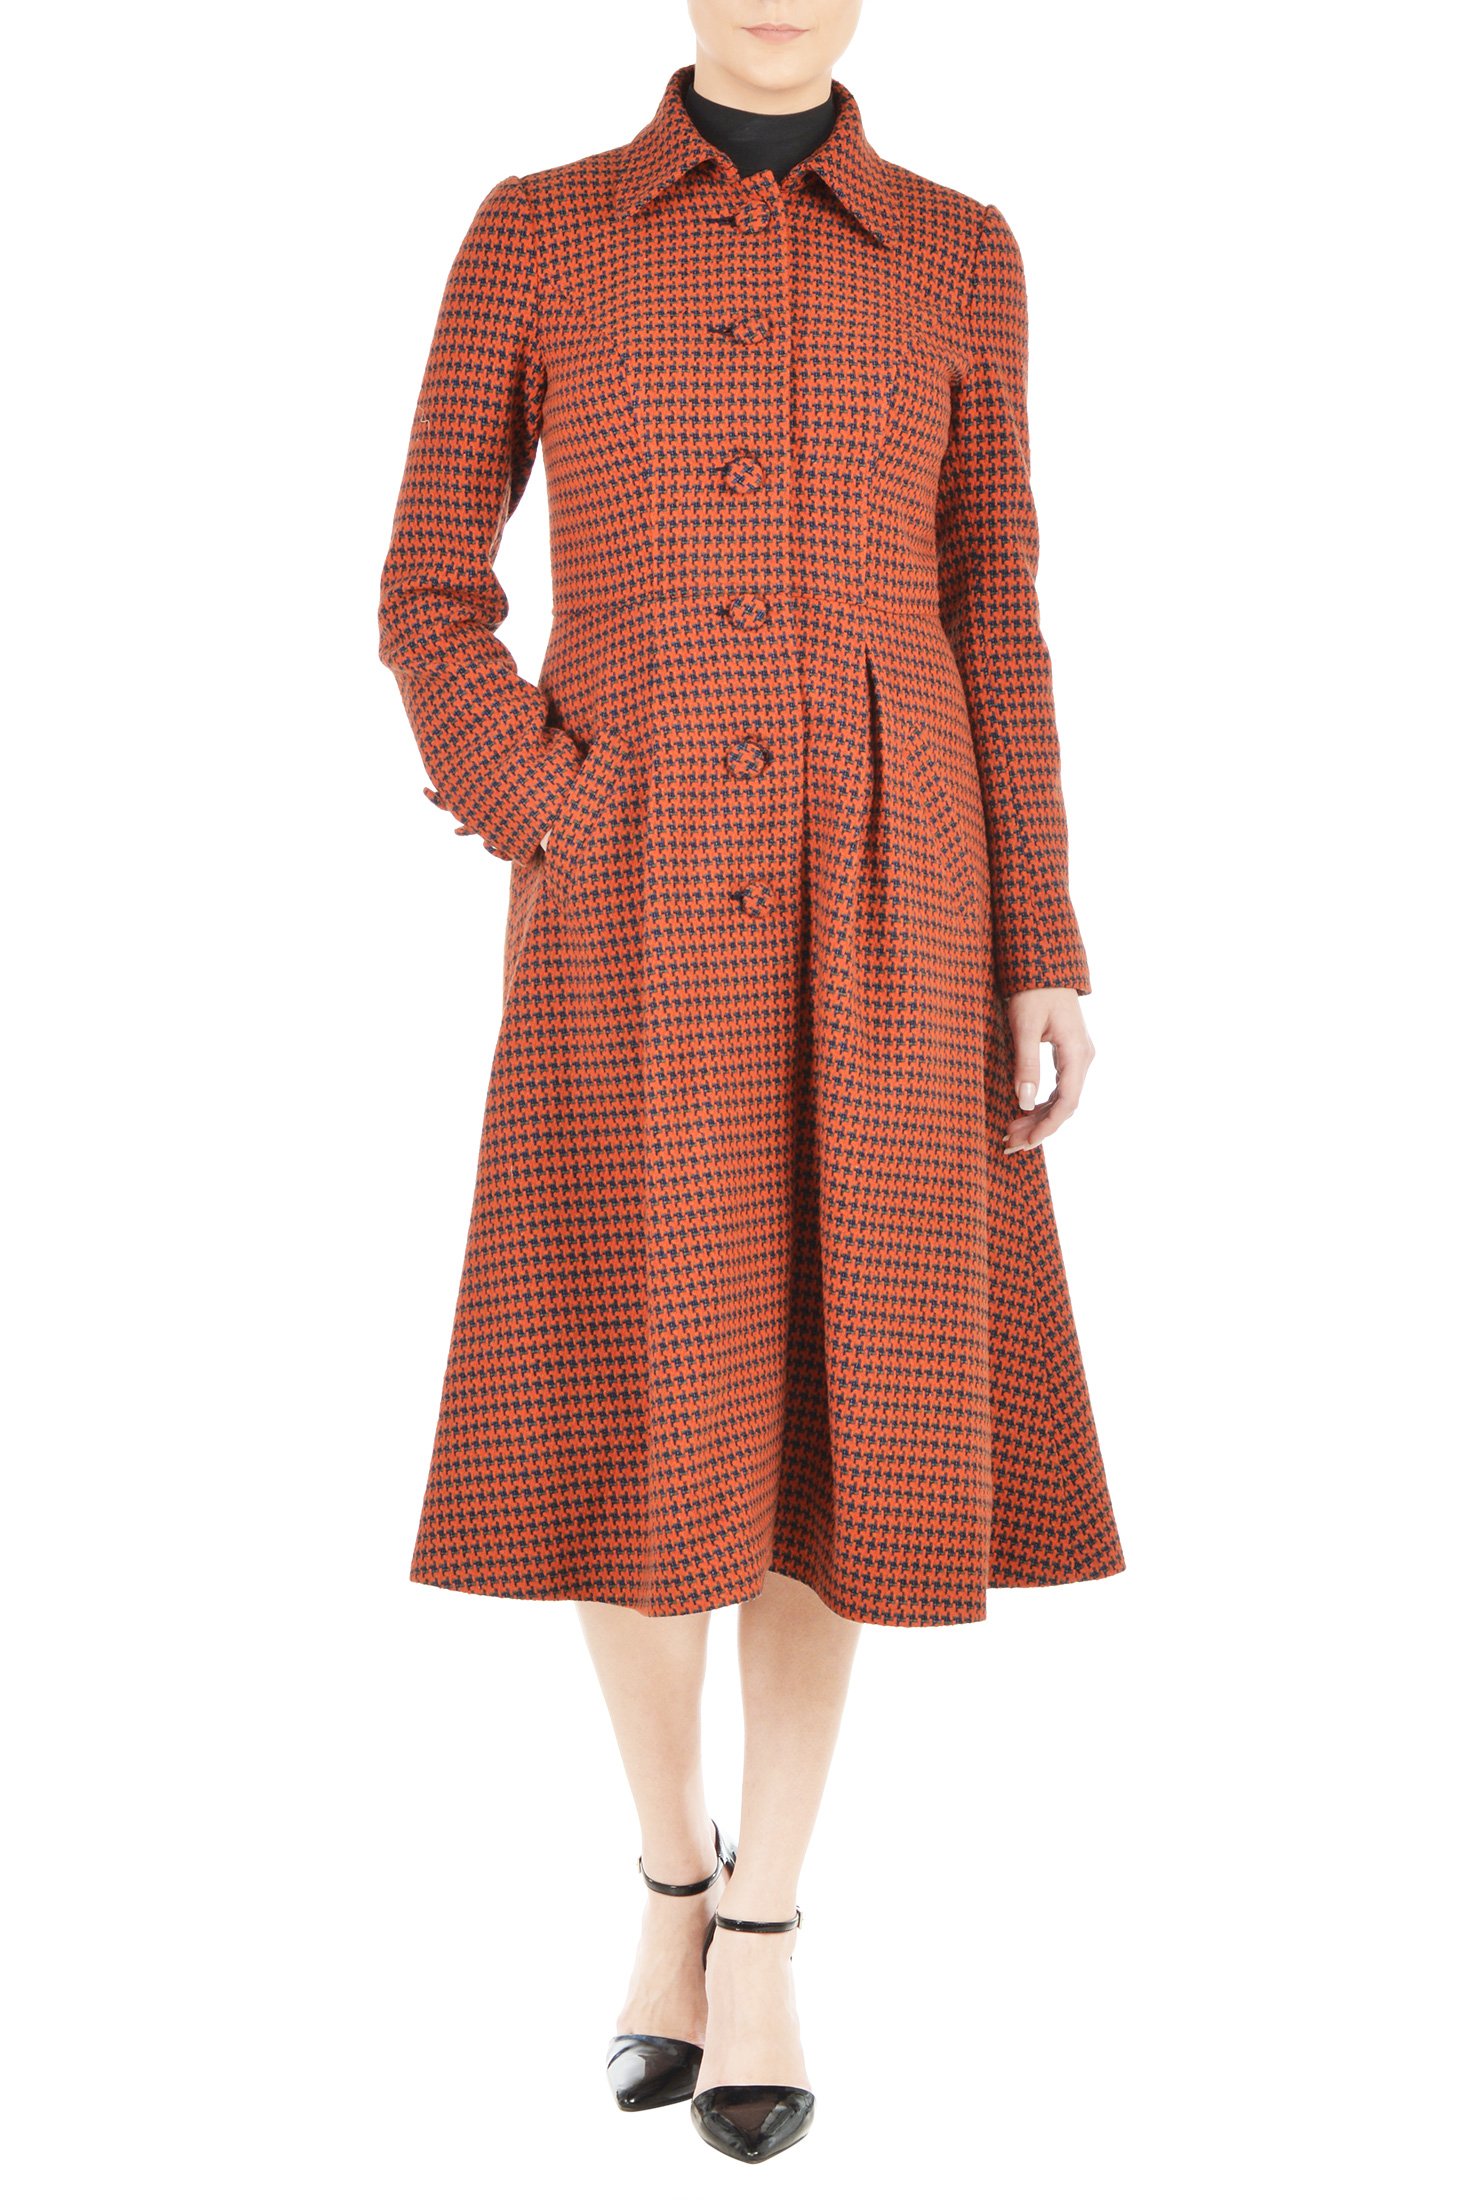 Shop Houndstooth wool blend fit-and-flare coat | eShakti